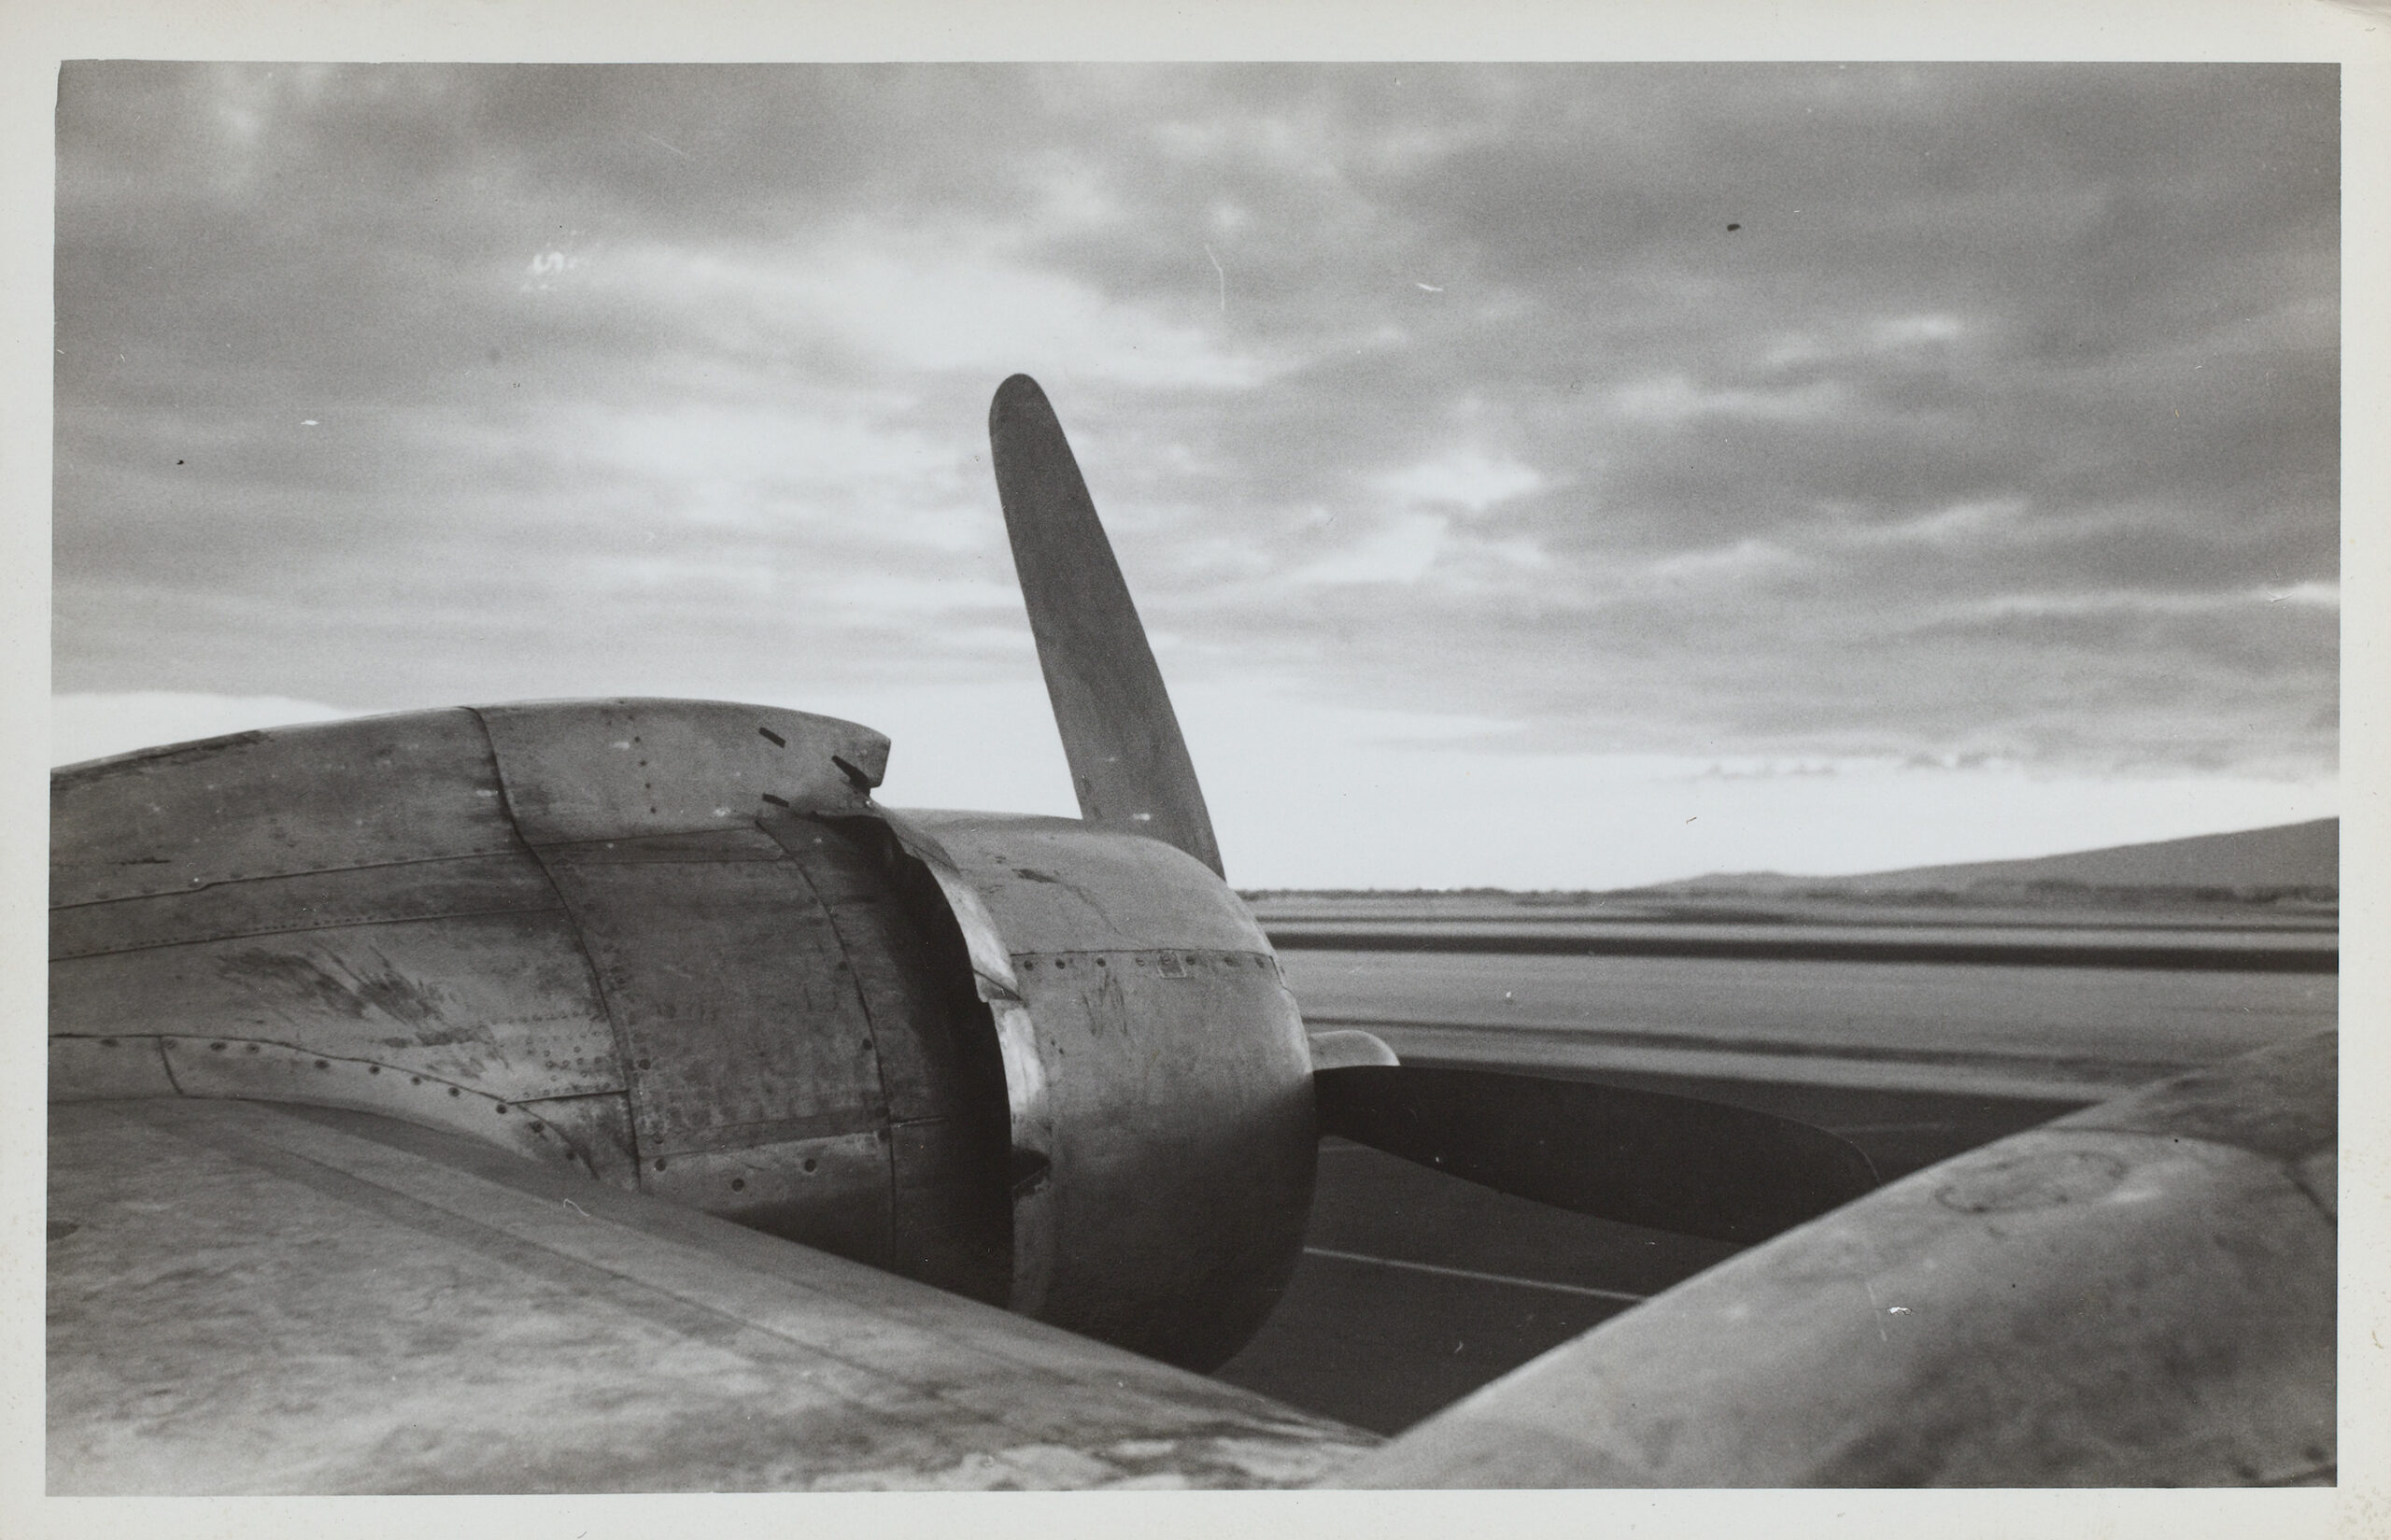 Black and white photograph of a plane propeller against a cloudy horizon.